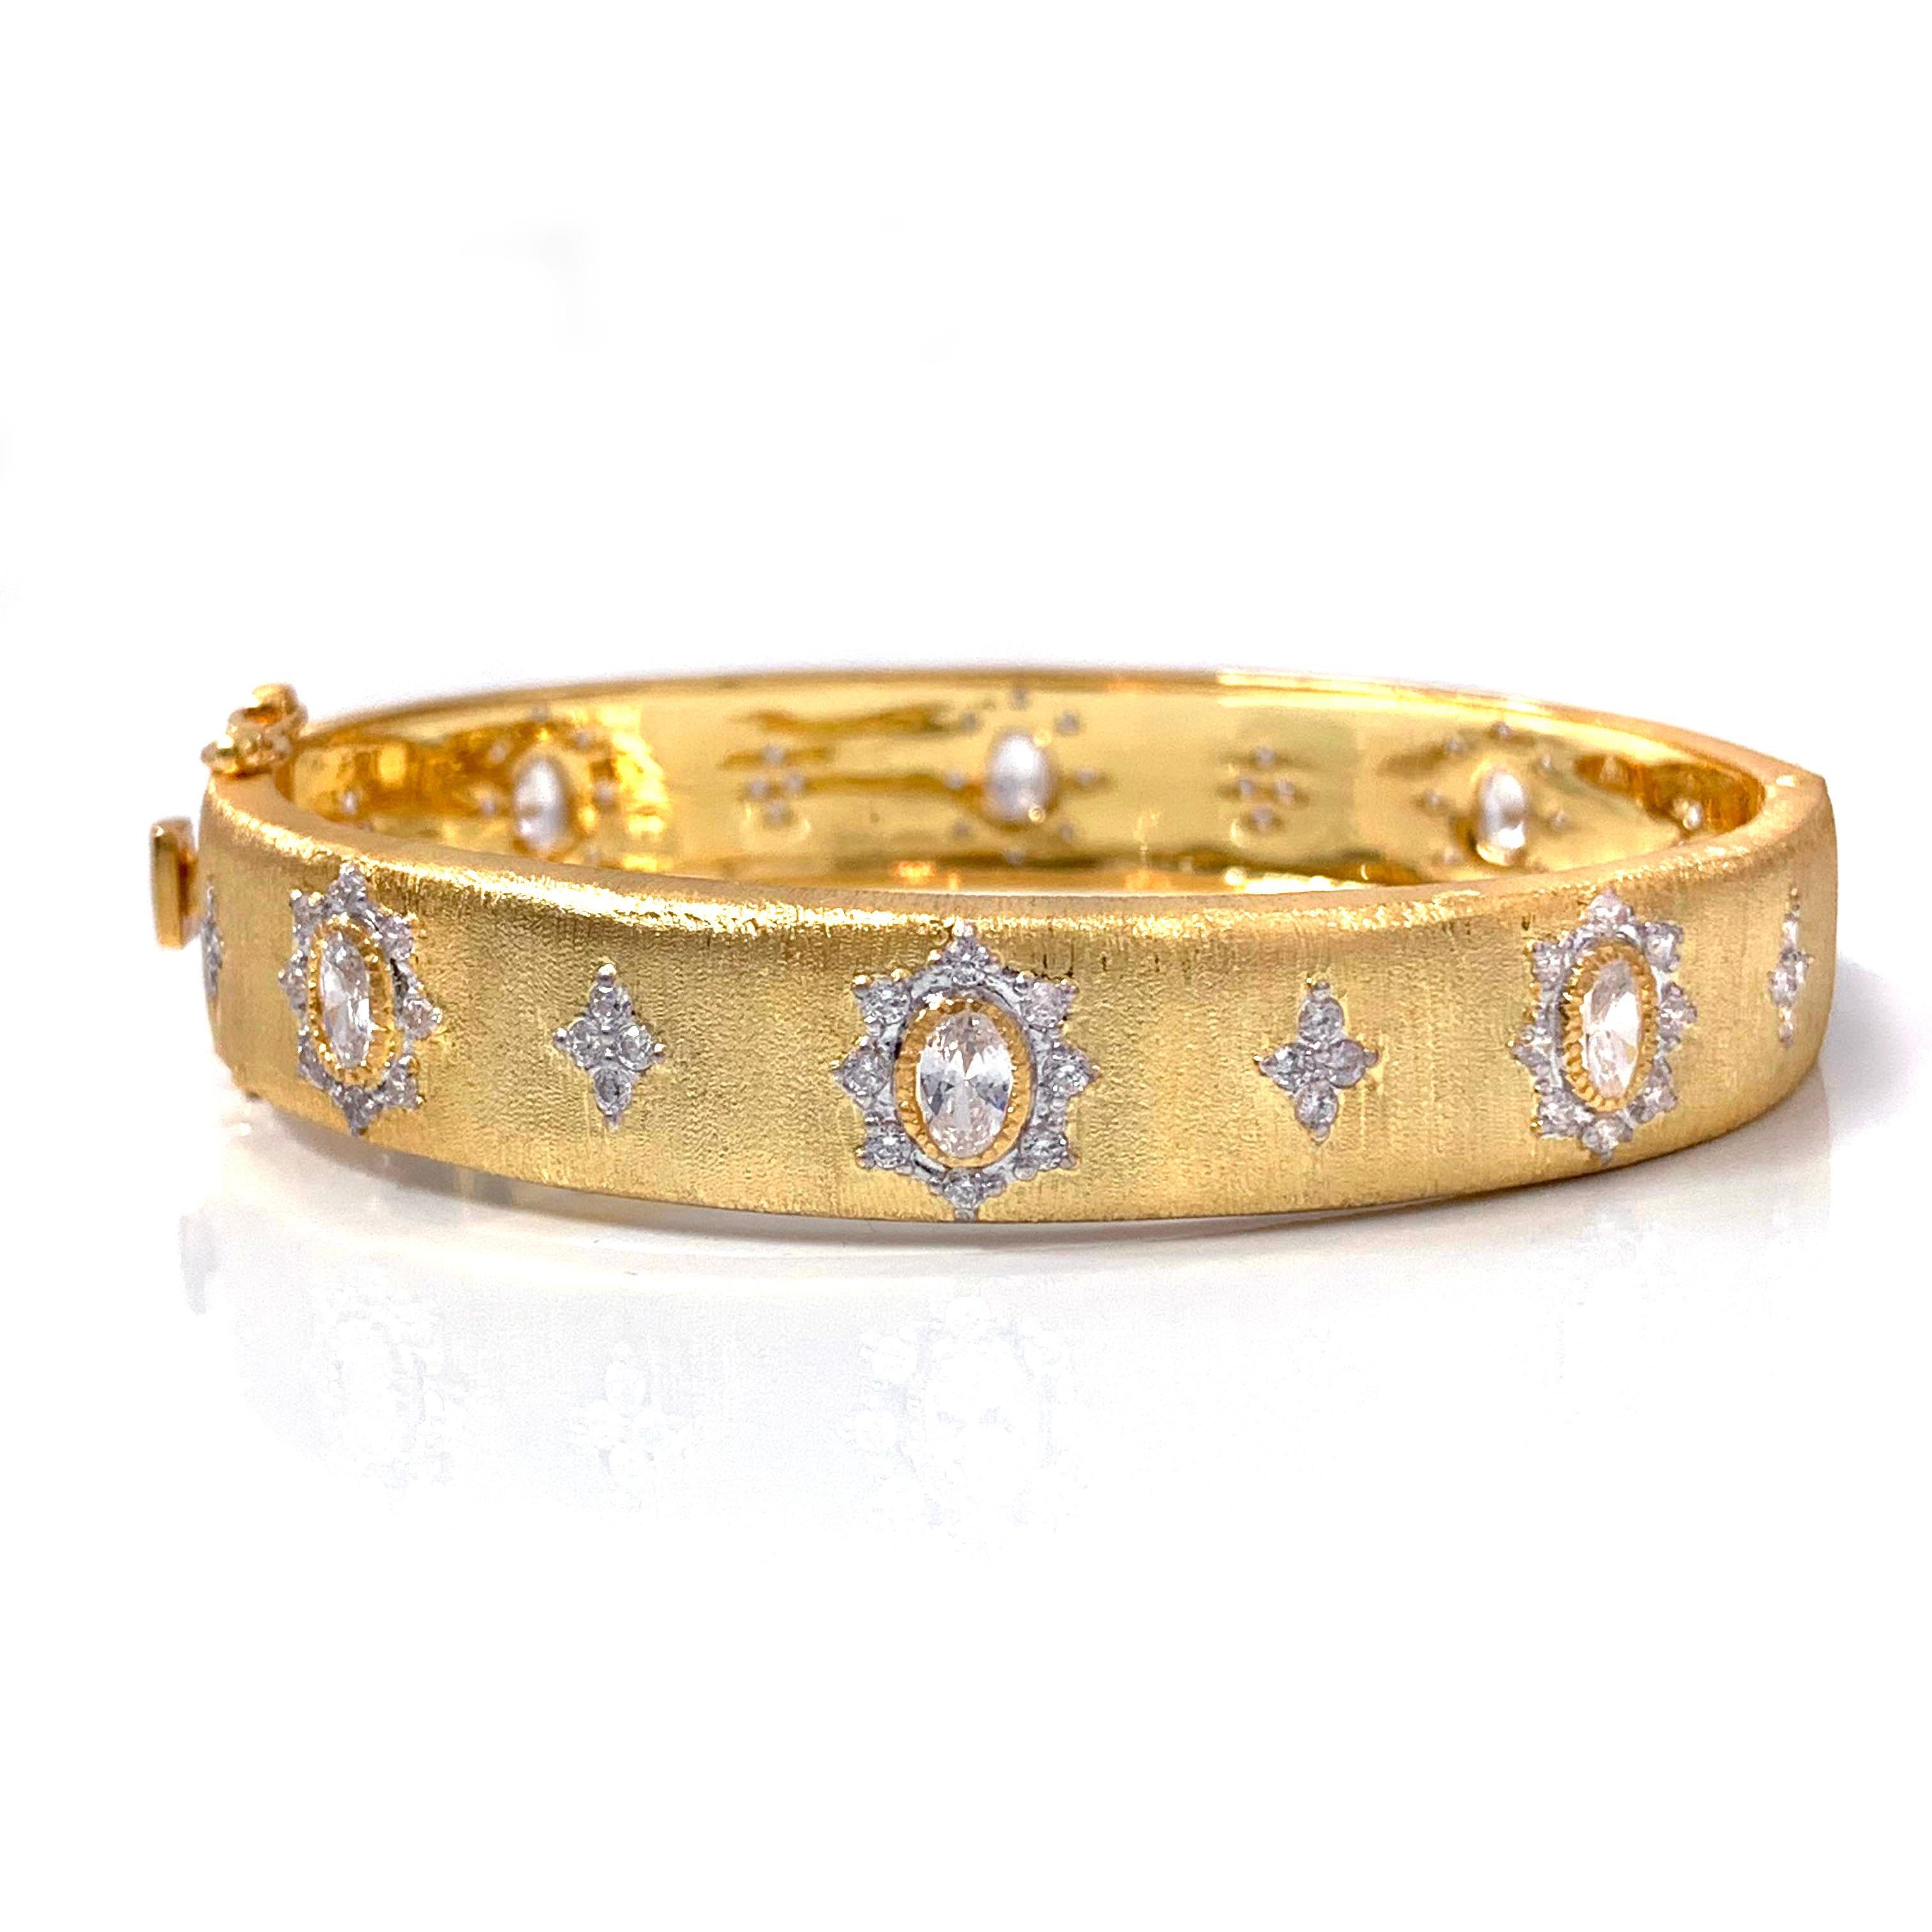 Bijoux Num hand-engraved star pattern vermeil bangle bracelet. 

This beautiful bracelet features over 80 pcs of oval and round faux diamond cubic zirconia (CZ), handcrafted Italian 